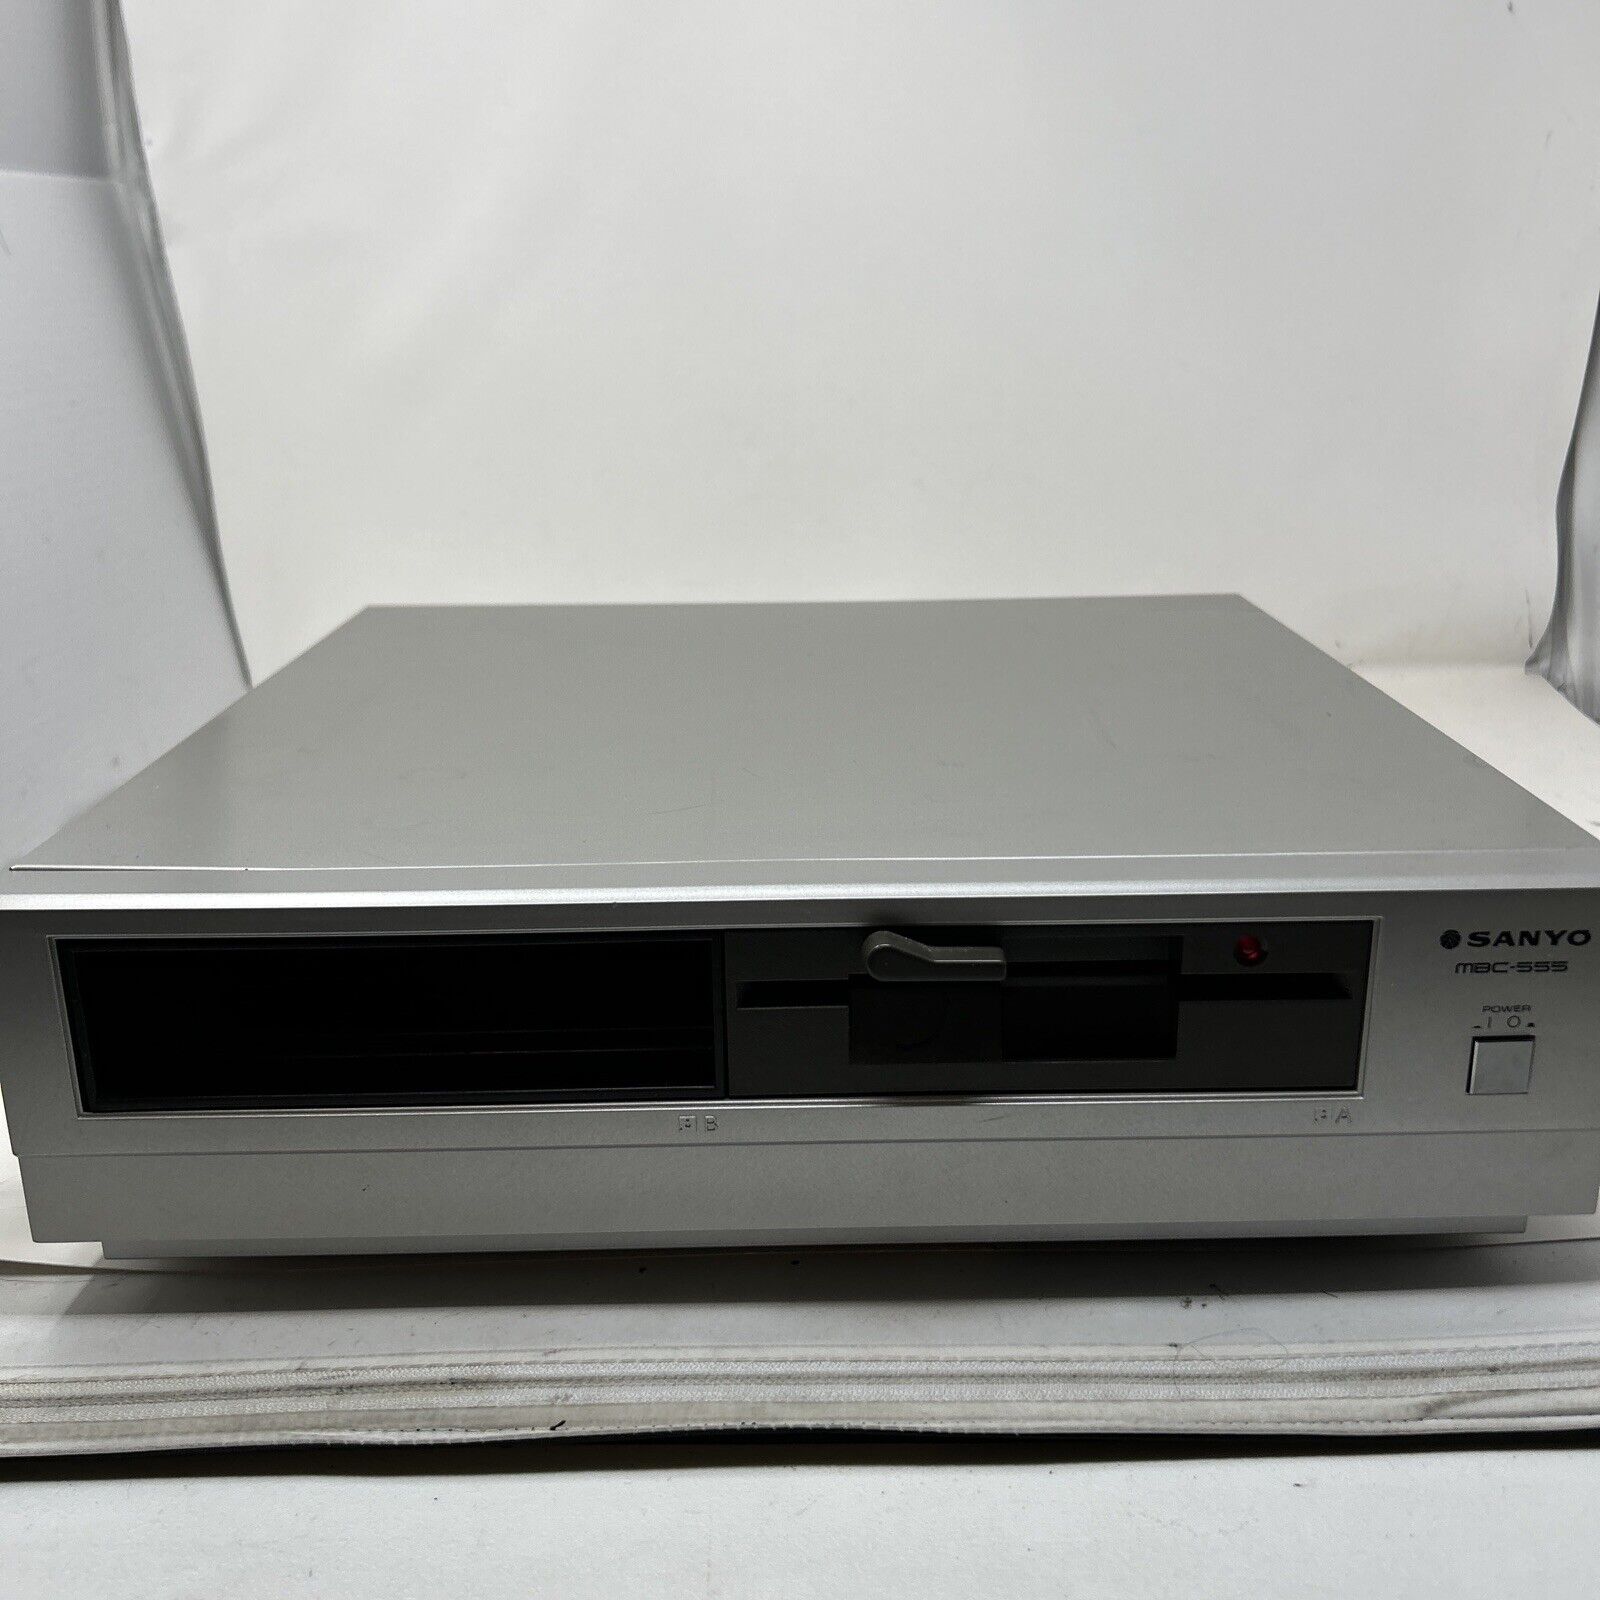 Sanyo MBC 555 Vintage Personal Computer Powers On As Is Parts